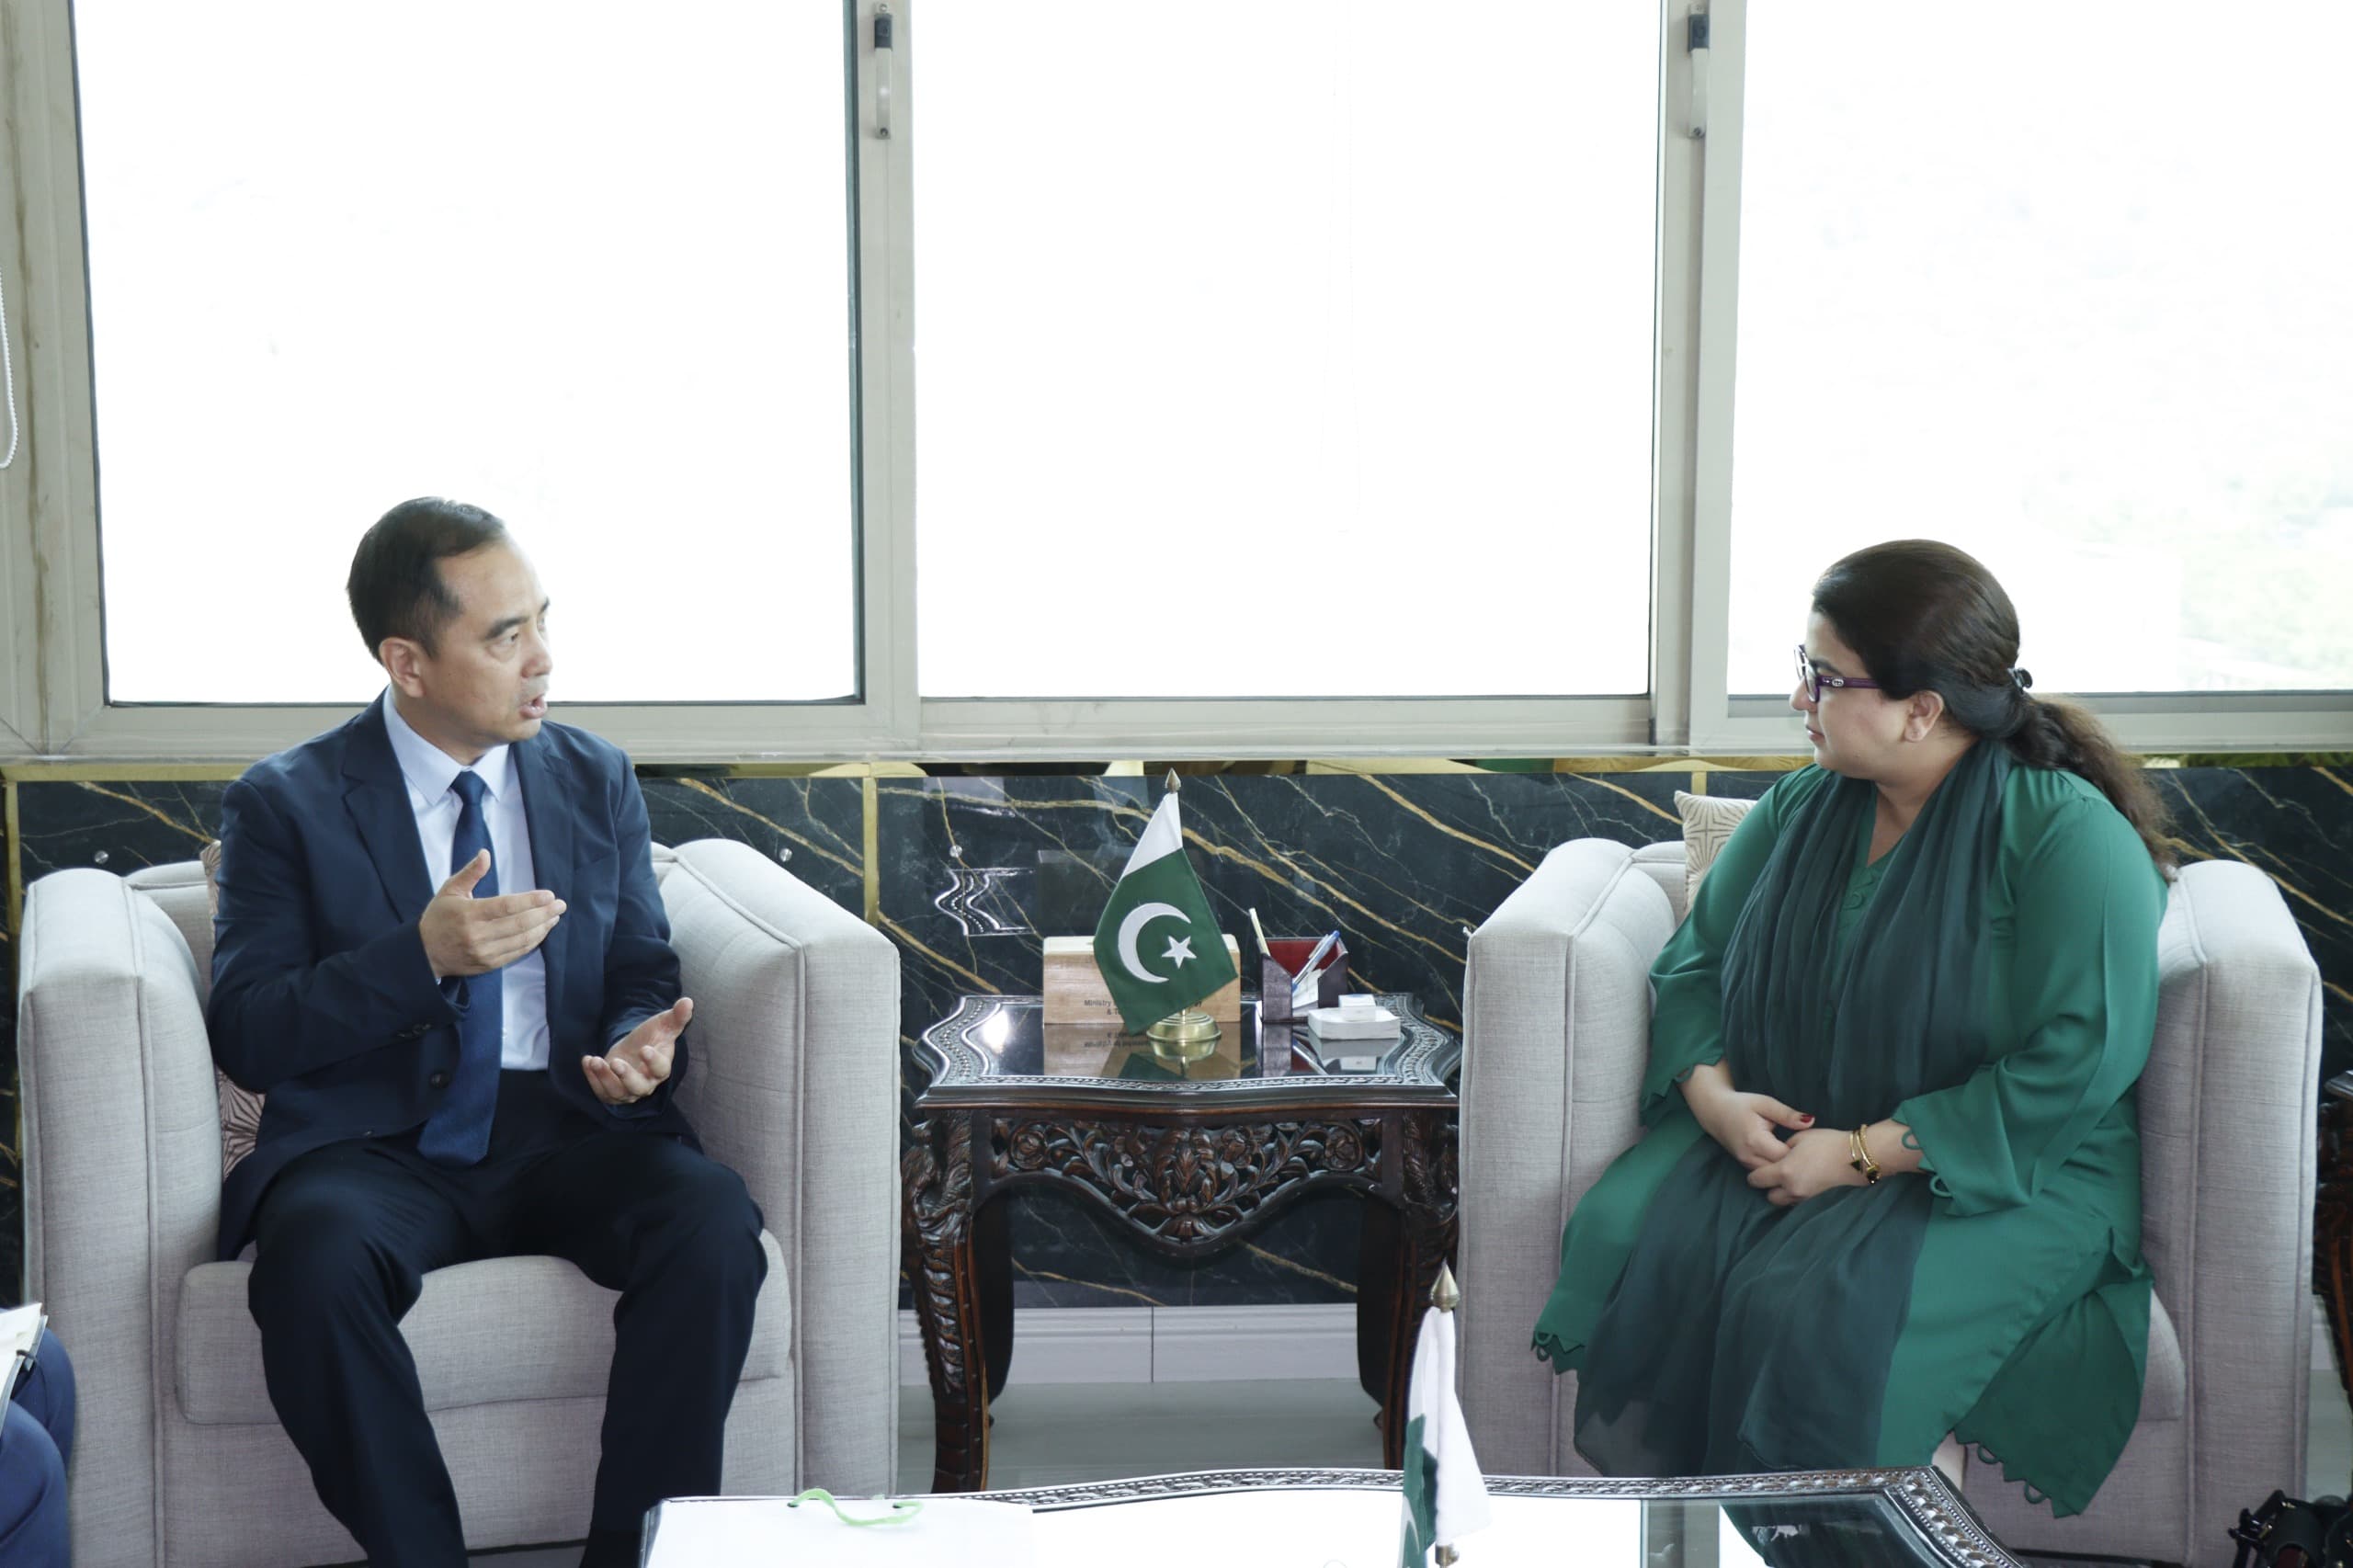 Zong 4G’s CEO Mr. Huo Junli meets Minister of State for IT&T Ms. Shaza Fatima to discuss the future of Telecom  in Pakistan